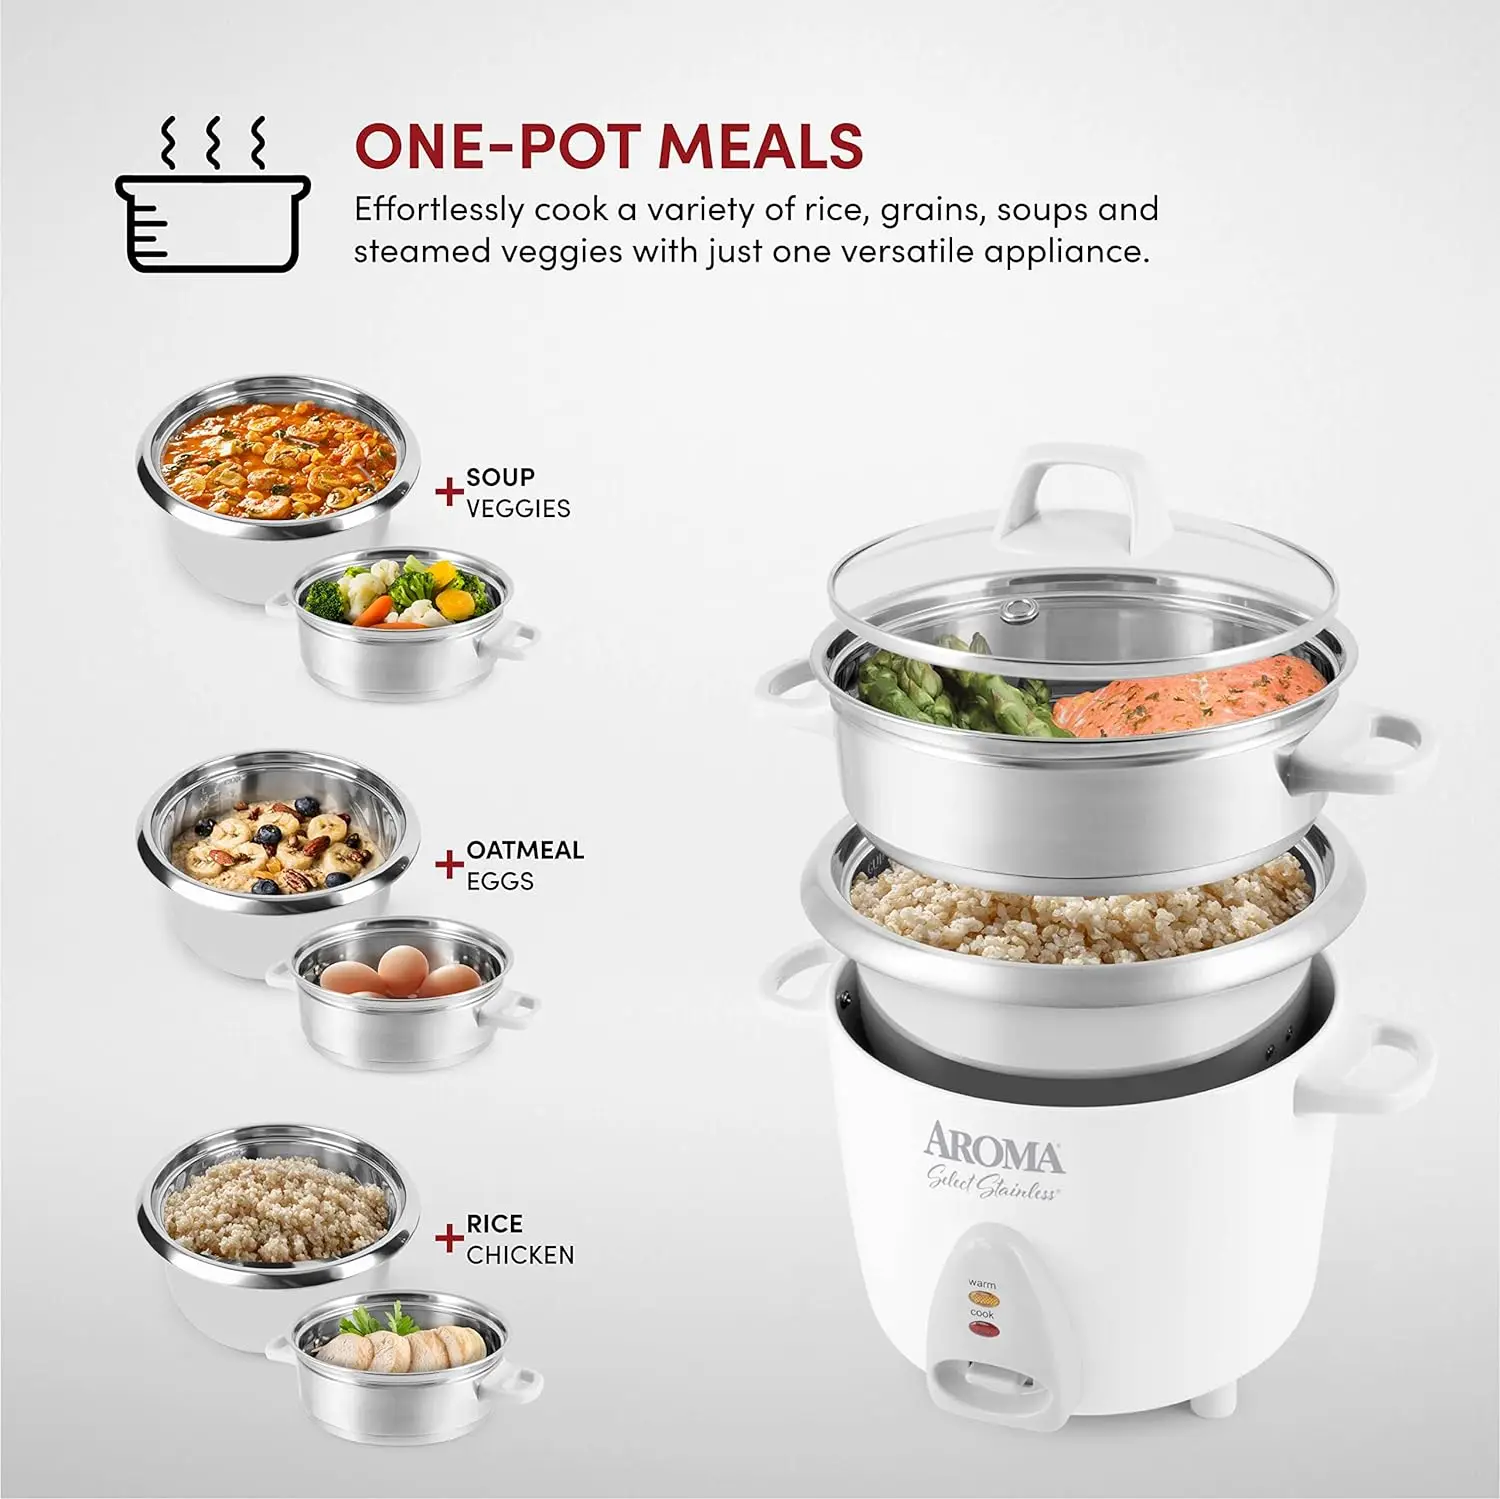 https://ae01.alicdn.com/kf/Sb6a45ff9415347689c838330c377cbf9v/Housewares-14-Cup-Cooked-3Qt-Select-Stainless-Pot-Style-Rice-Cooker-Food-Steamer-One-Touch-Operation.jpg